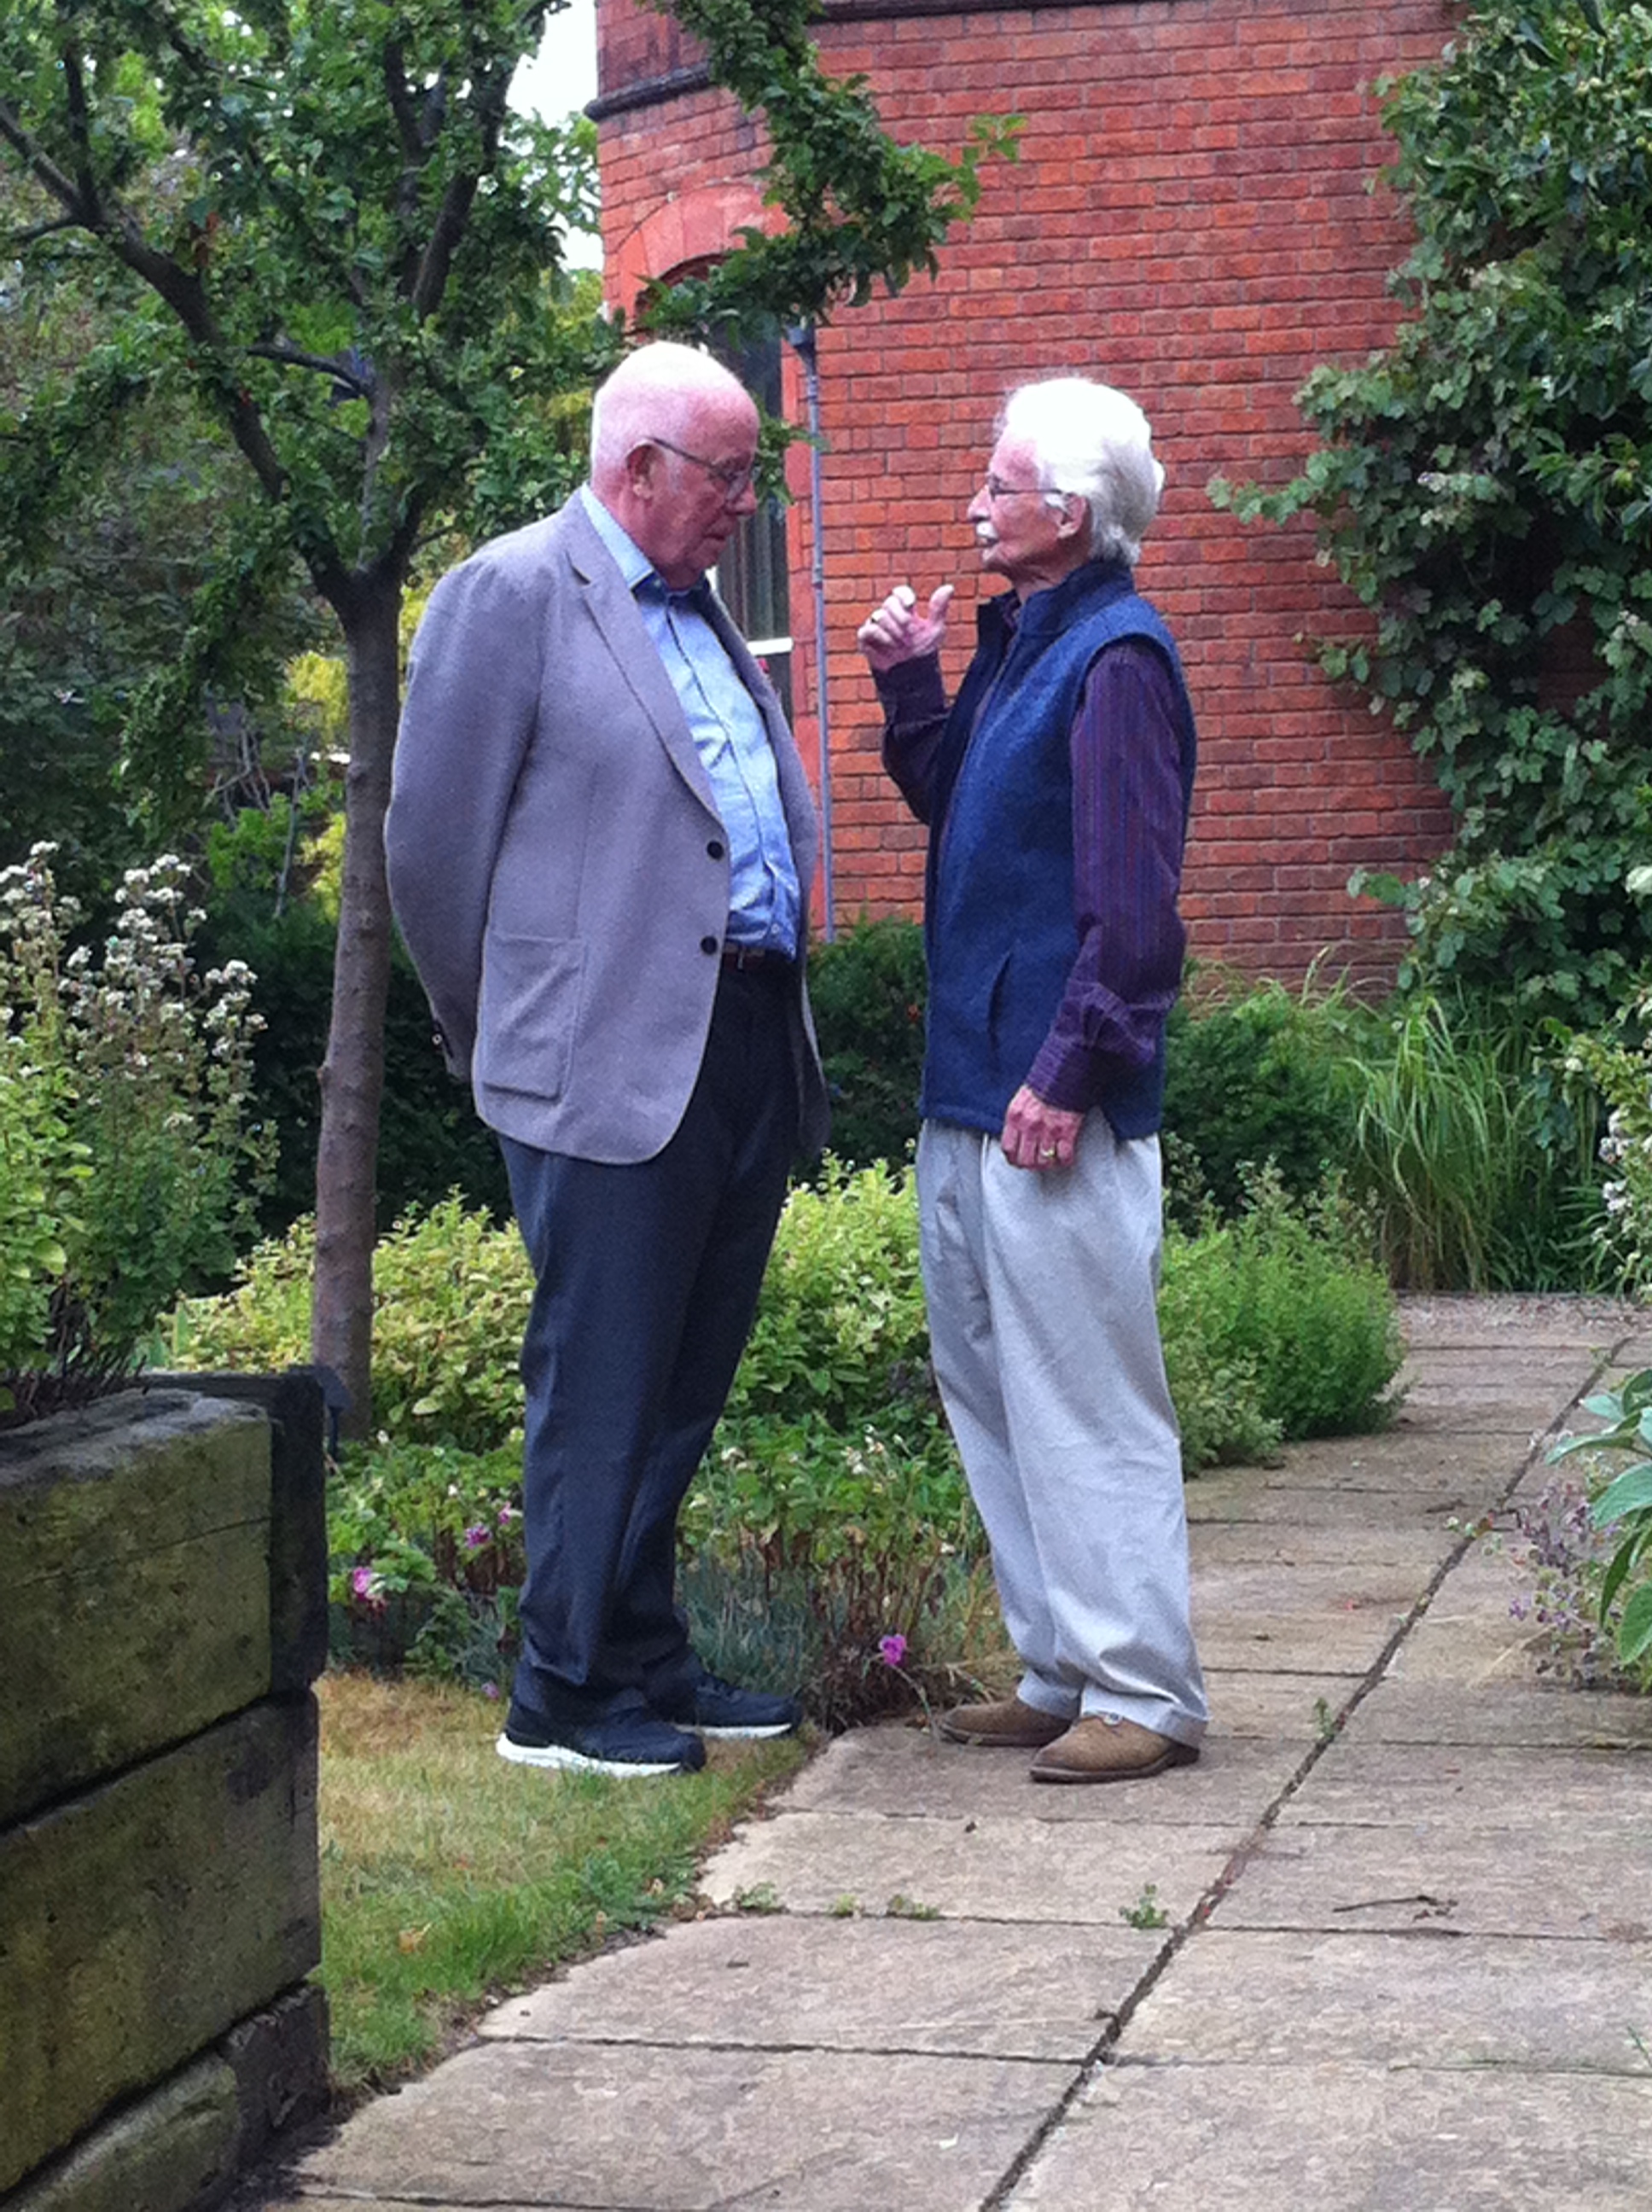 Richard Wilson and James Knowlson during the filming of the BBC's upcoming Artsnight episode dedicated to Samuel Beckett, July 2015.